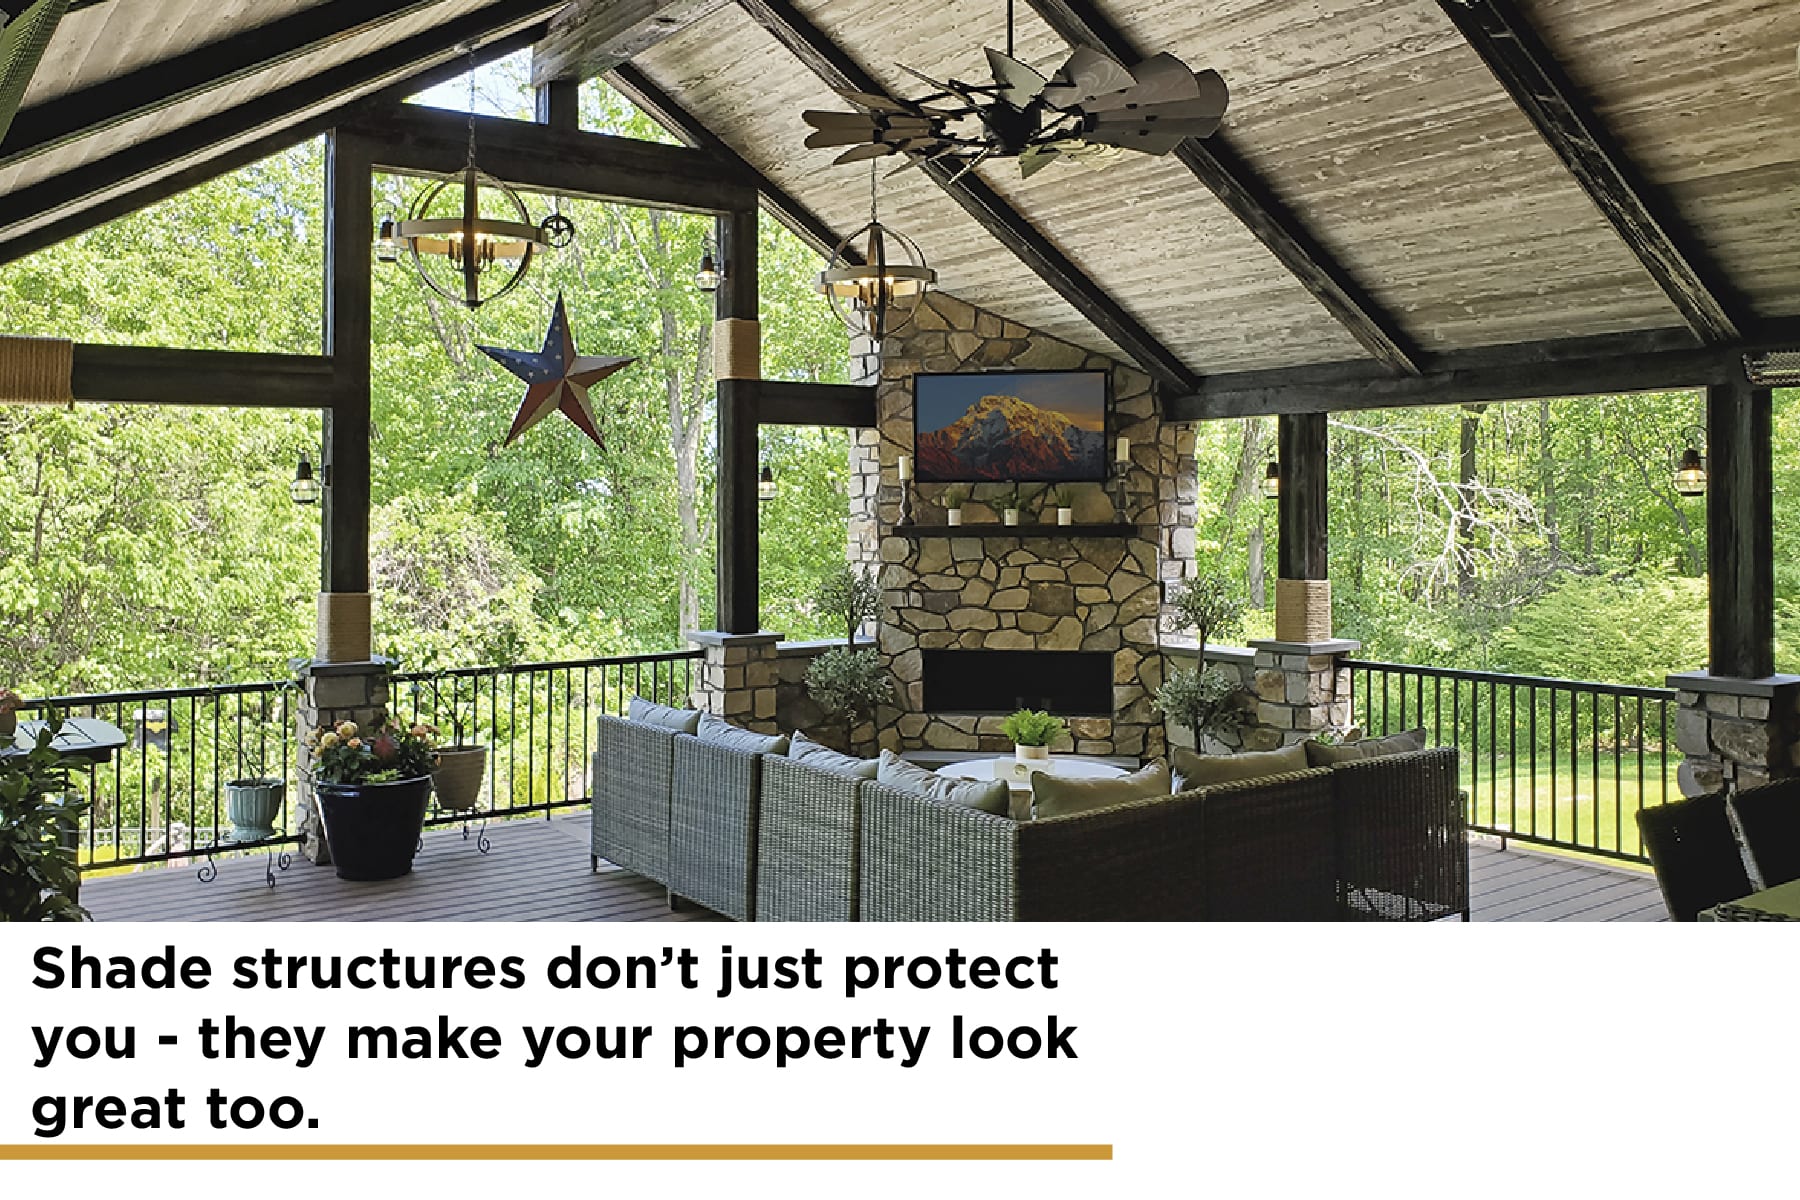 shade structures protect your deck and make your property look great